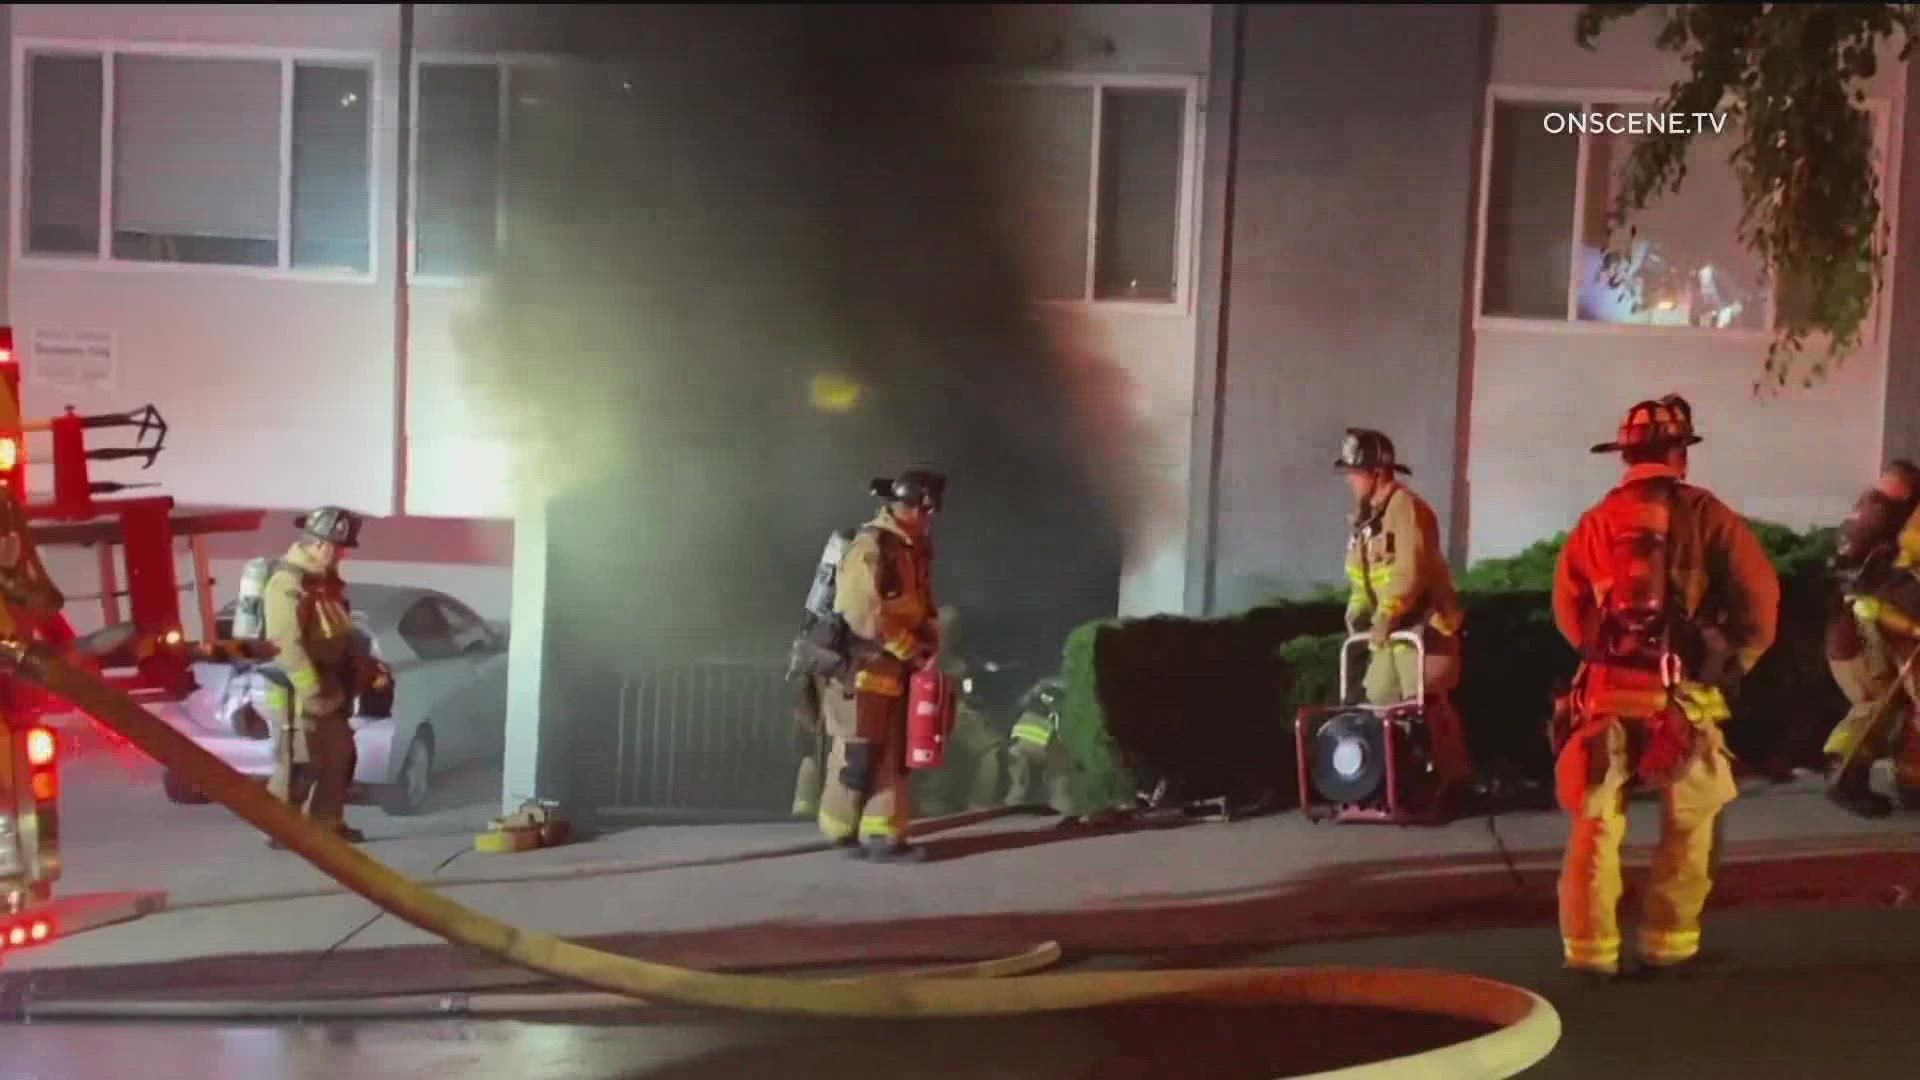 San Diego fire investigators are working to find out what caused a fire in the garage of an apartment complex in North Park overnight that left three cars destroyed.